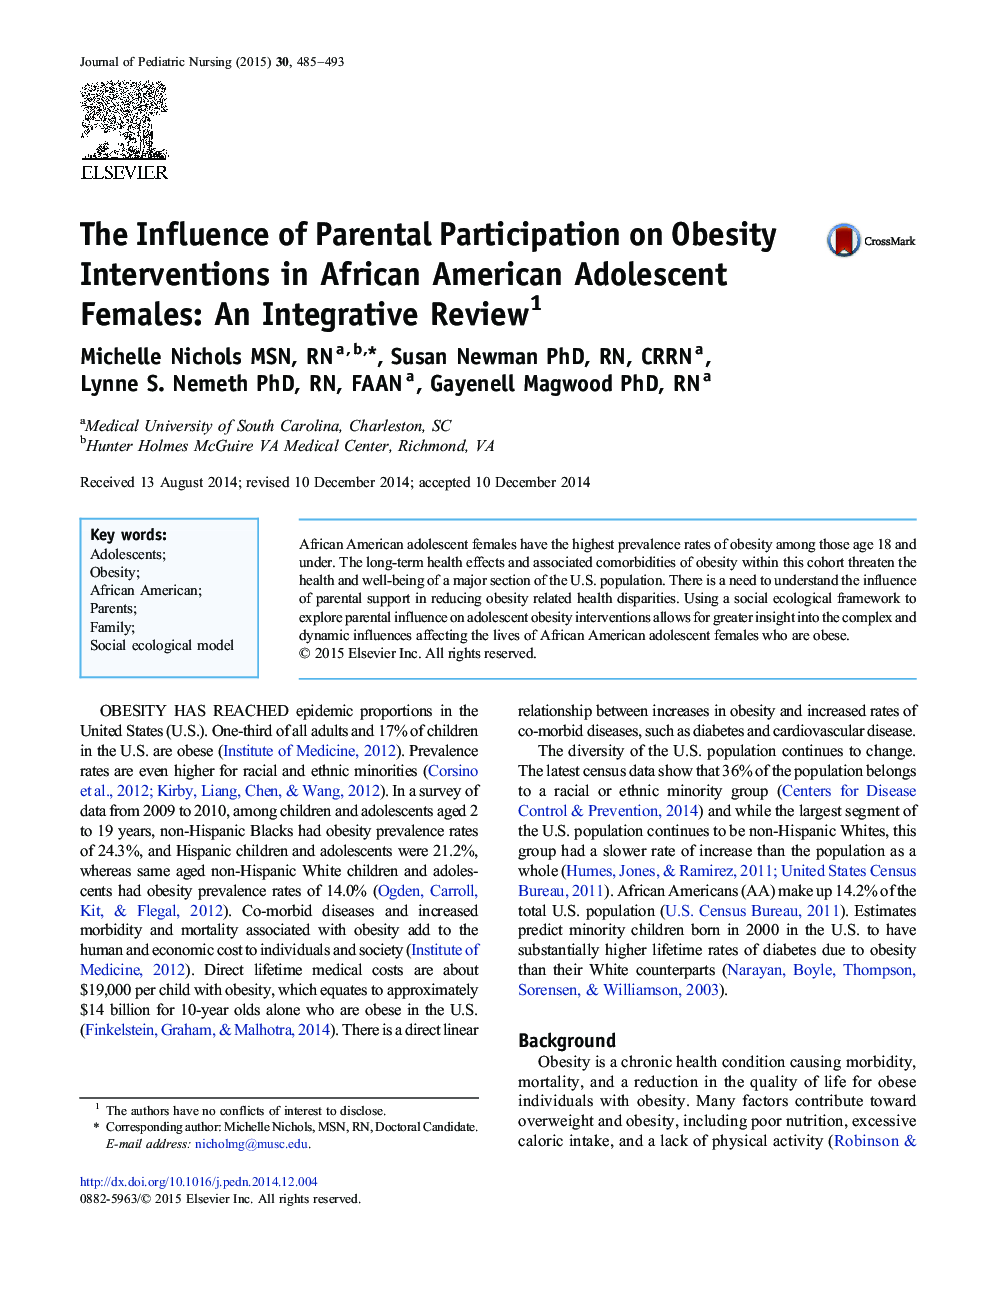 The Influence of Parental Participation on Obesity Interventions in African American Adolescent Females: An Integrative Review 1